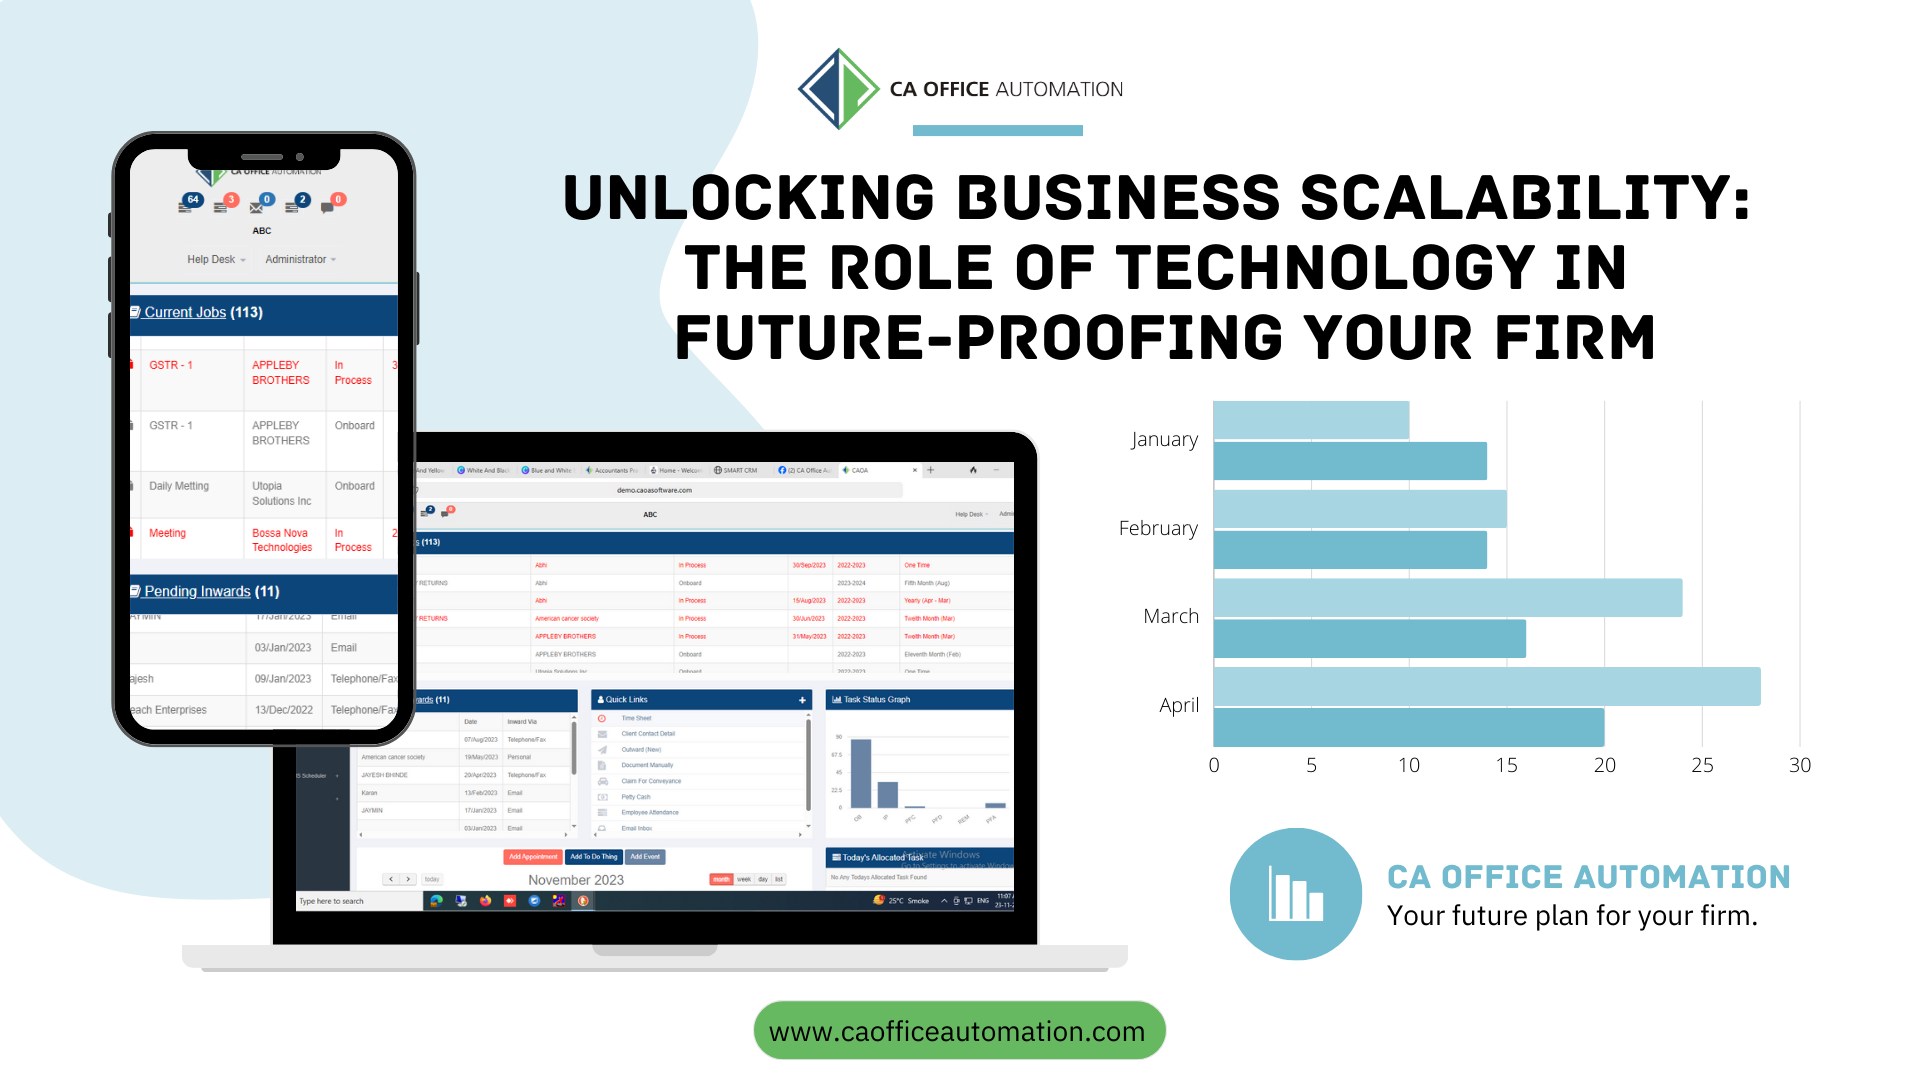 Unlocking Business Scalability: The Role of Technology in Future-Proofing Your Firm